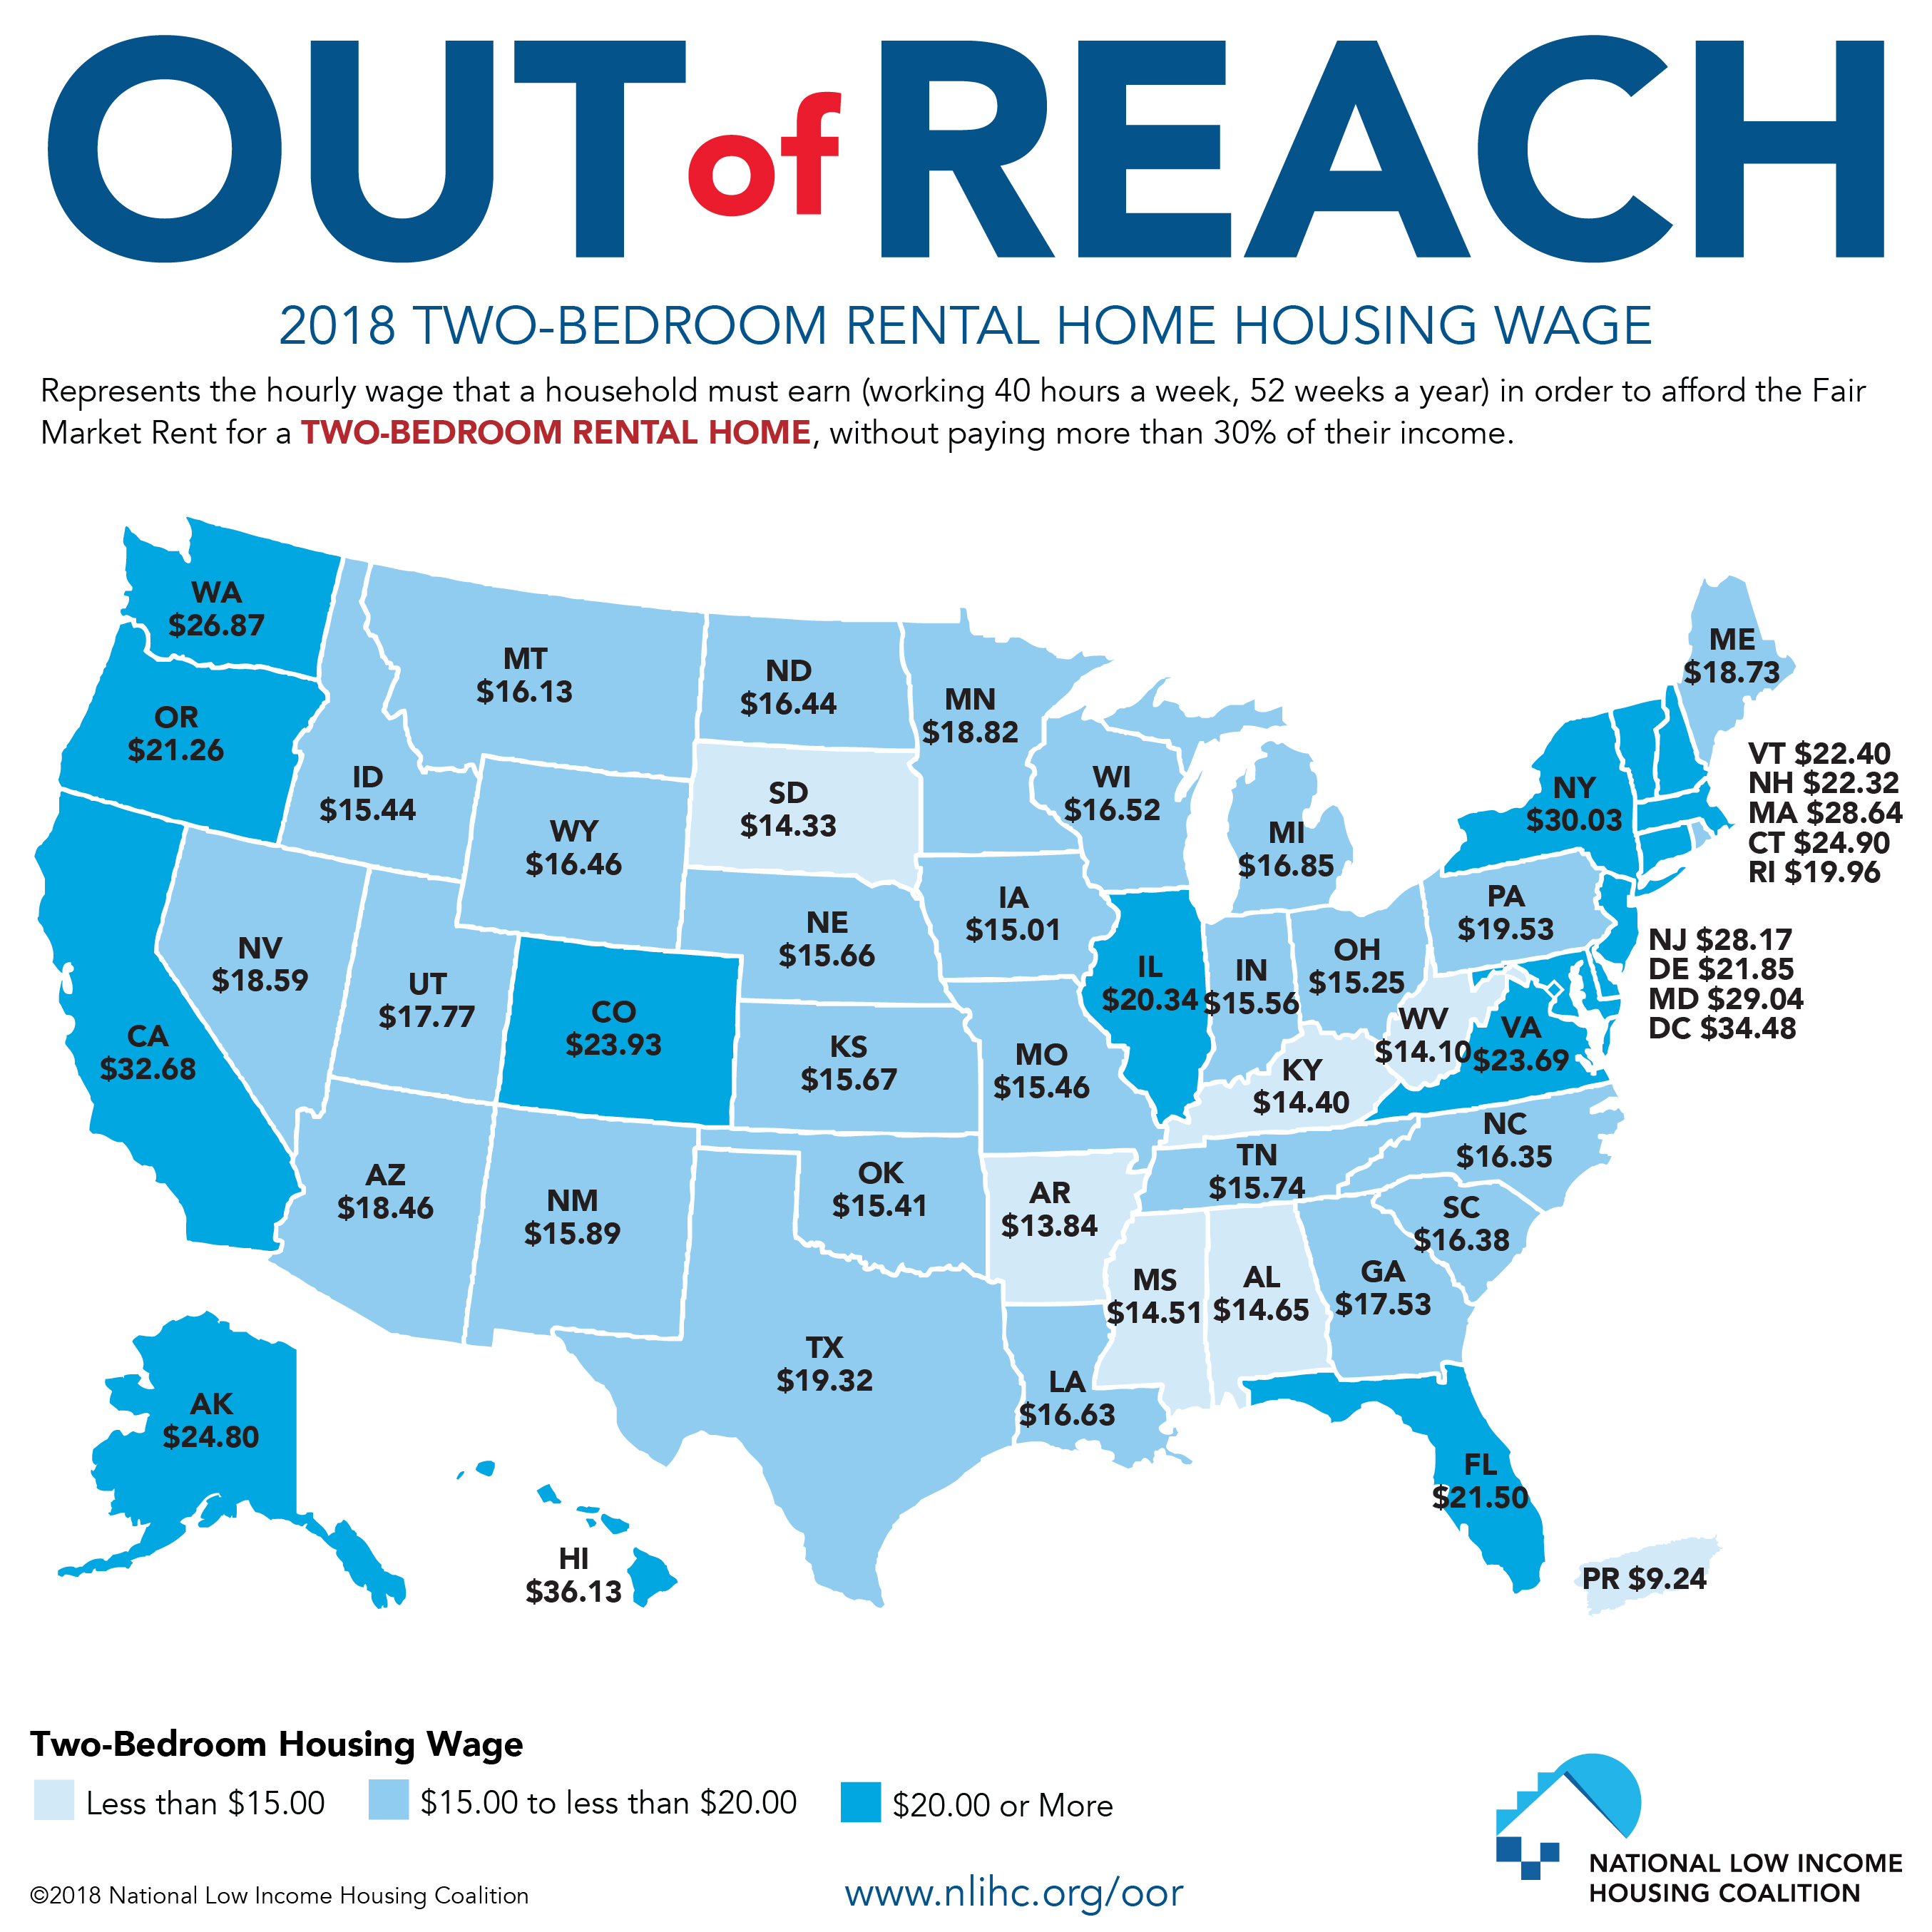 Out of Reach 2018 Two-Bedroom Rental Home Housing Wage